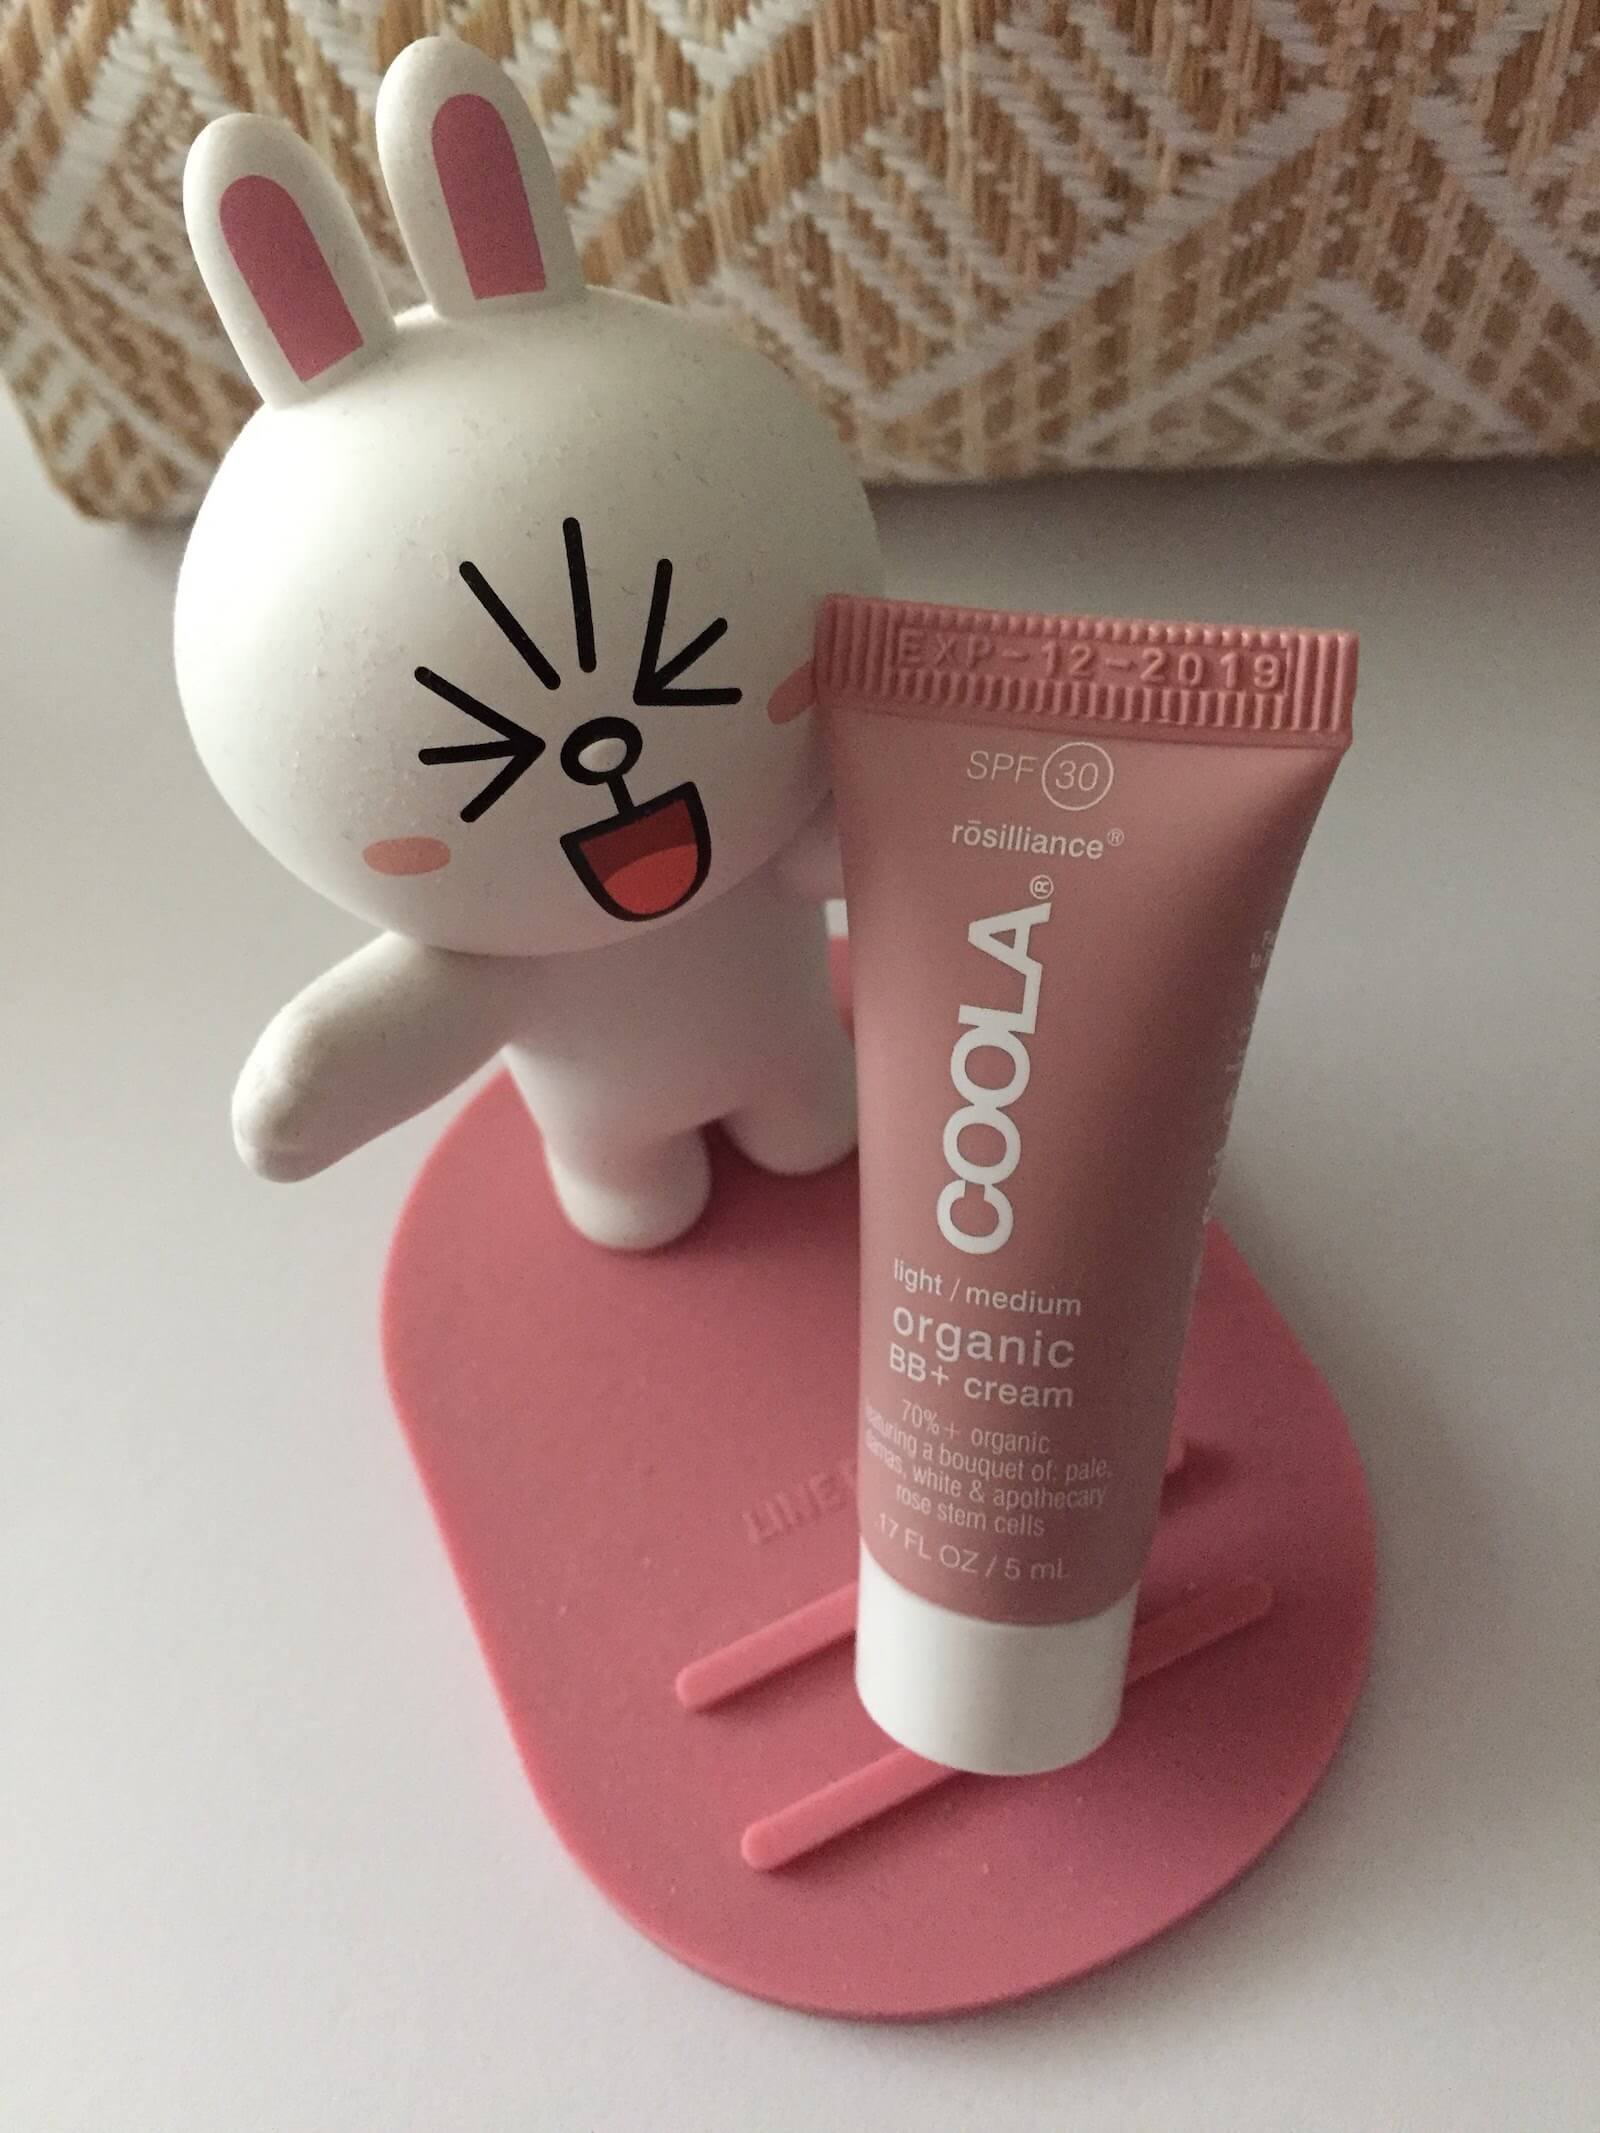 COOLA BB+ Cream Tinted Sunscreen review